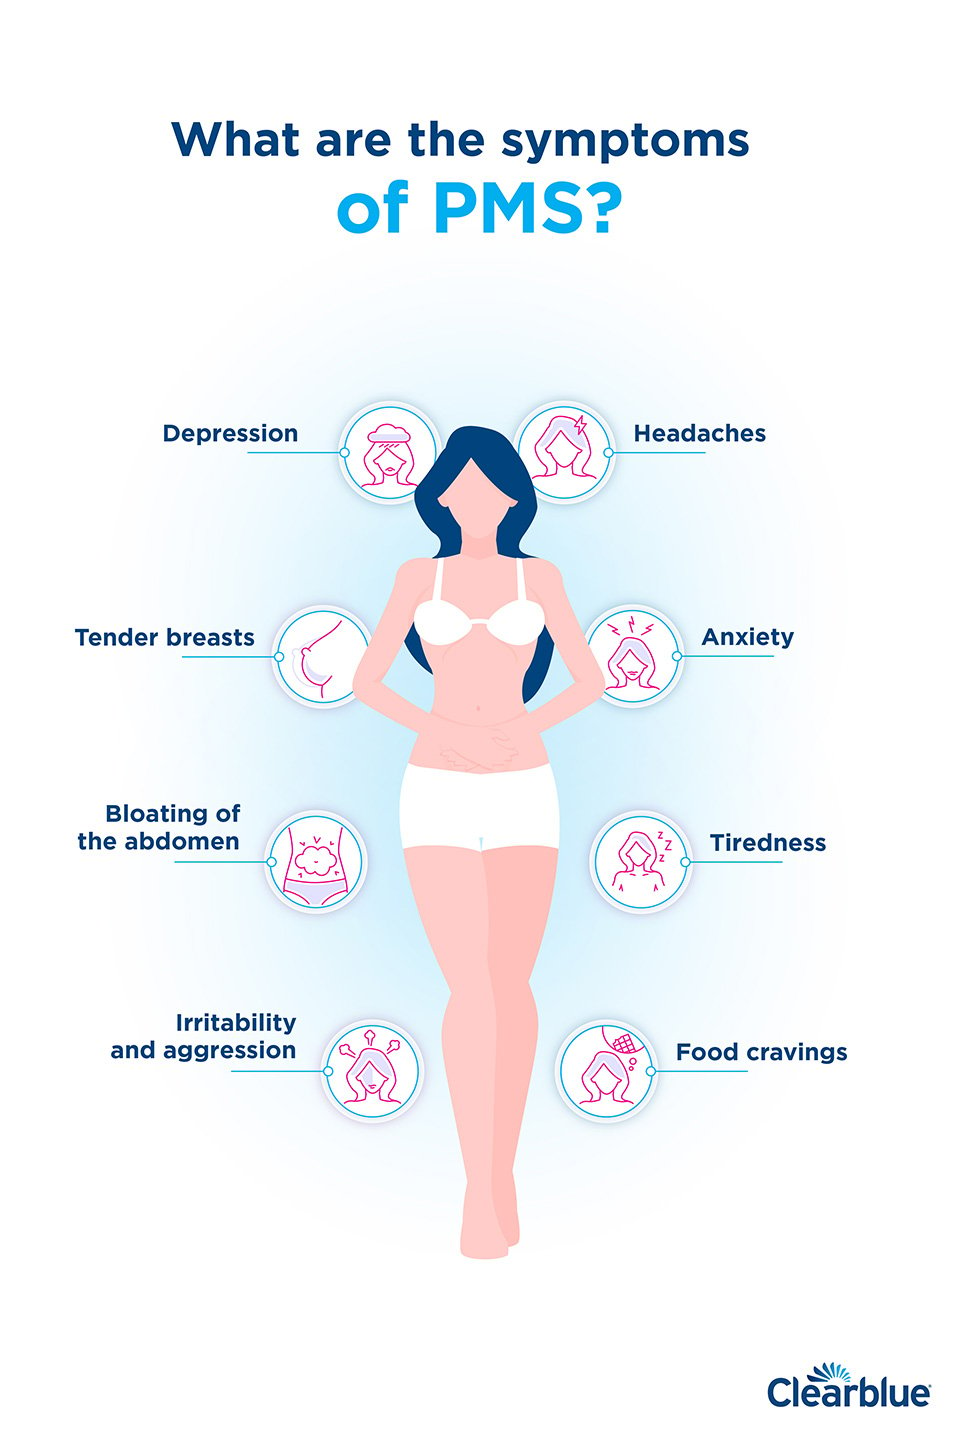 https://www.clearblue.com/sites/default/files/wysiwyg/periods-and-pre-menstrual-syndrome-2.jpg